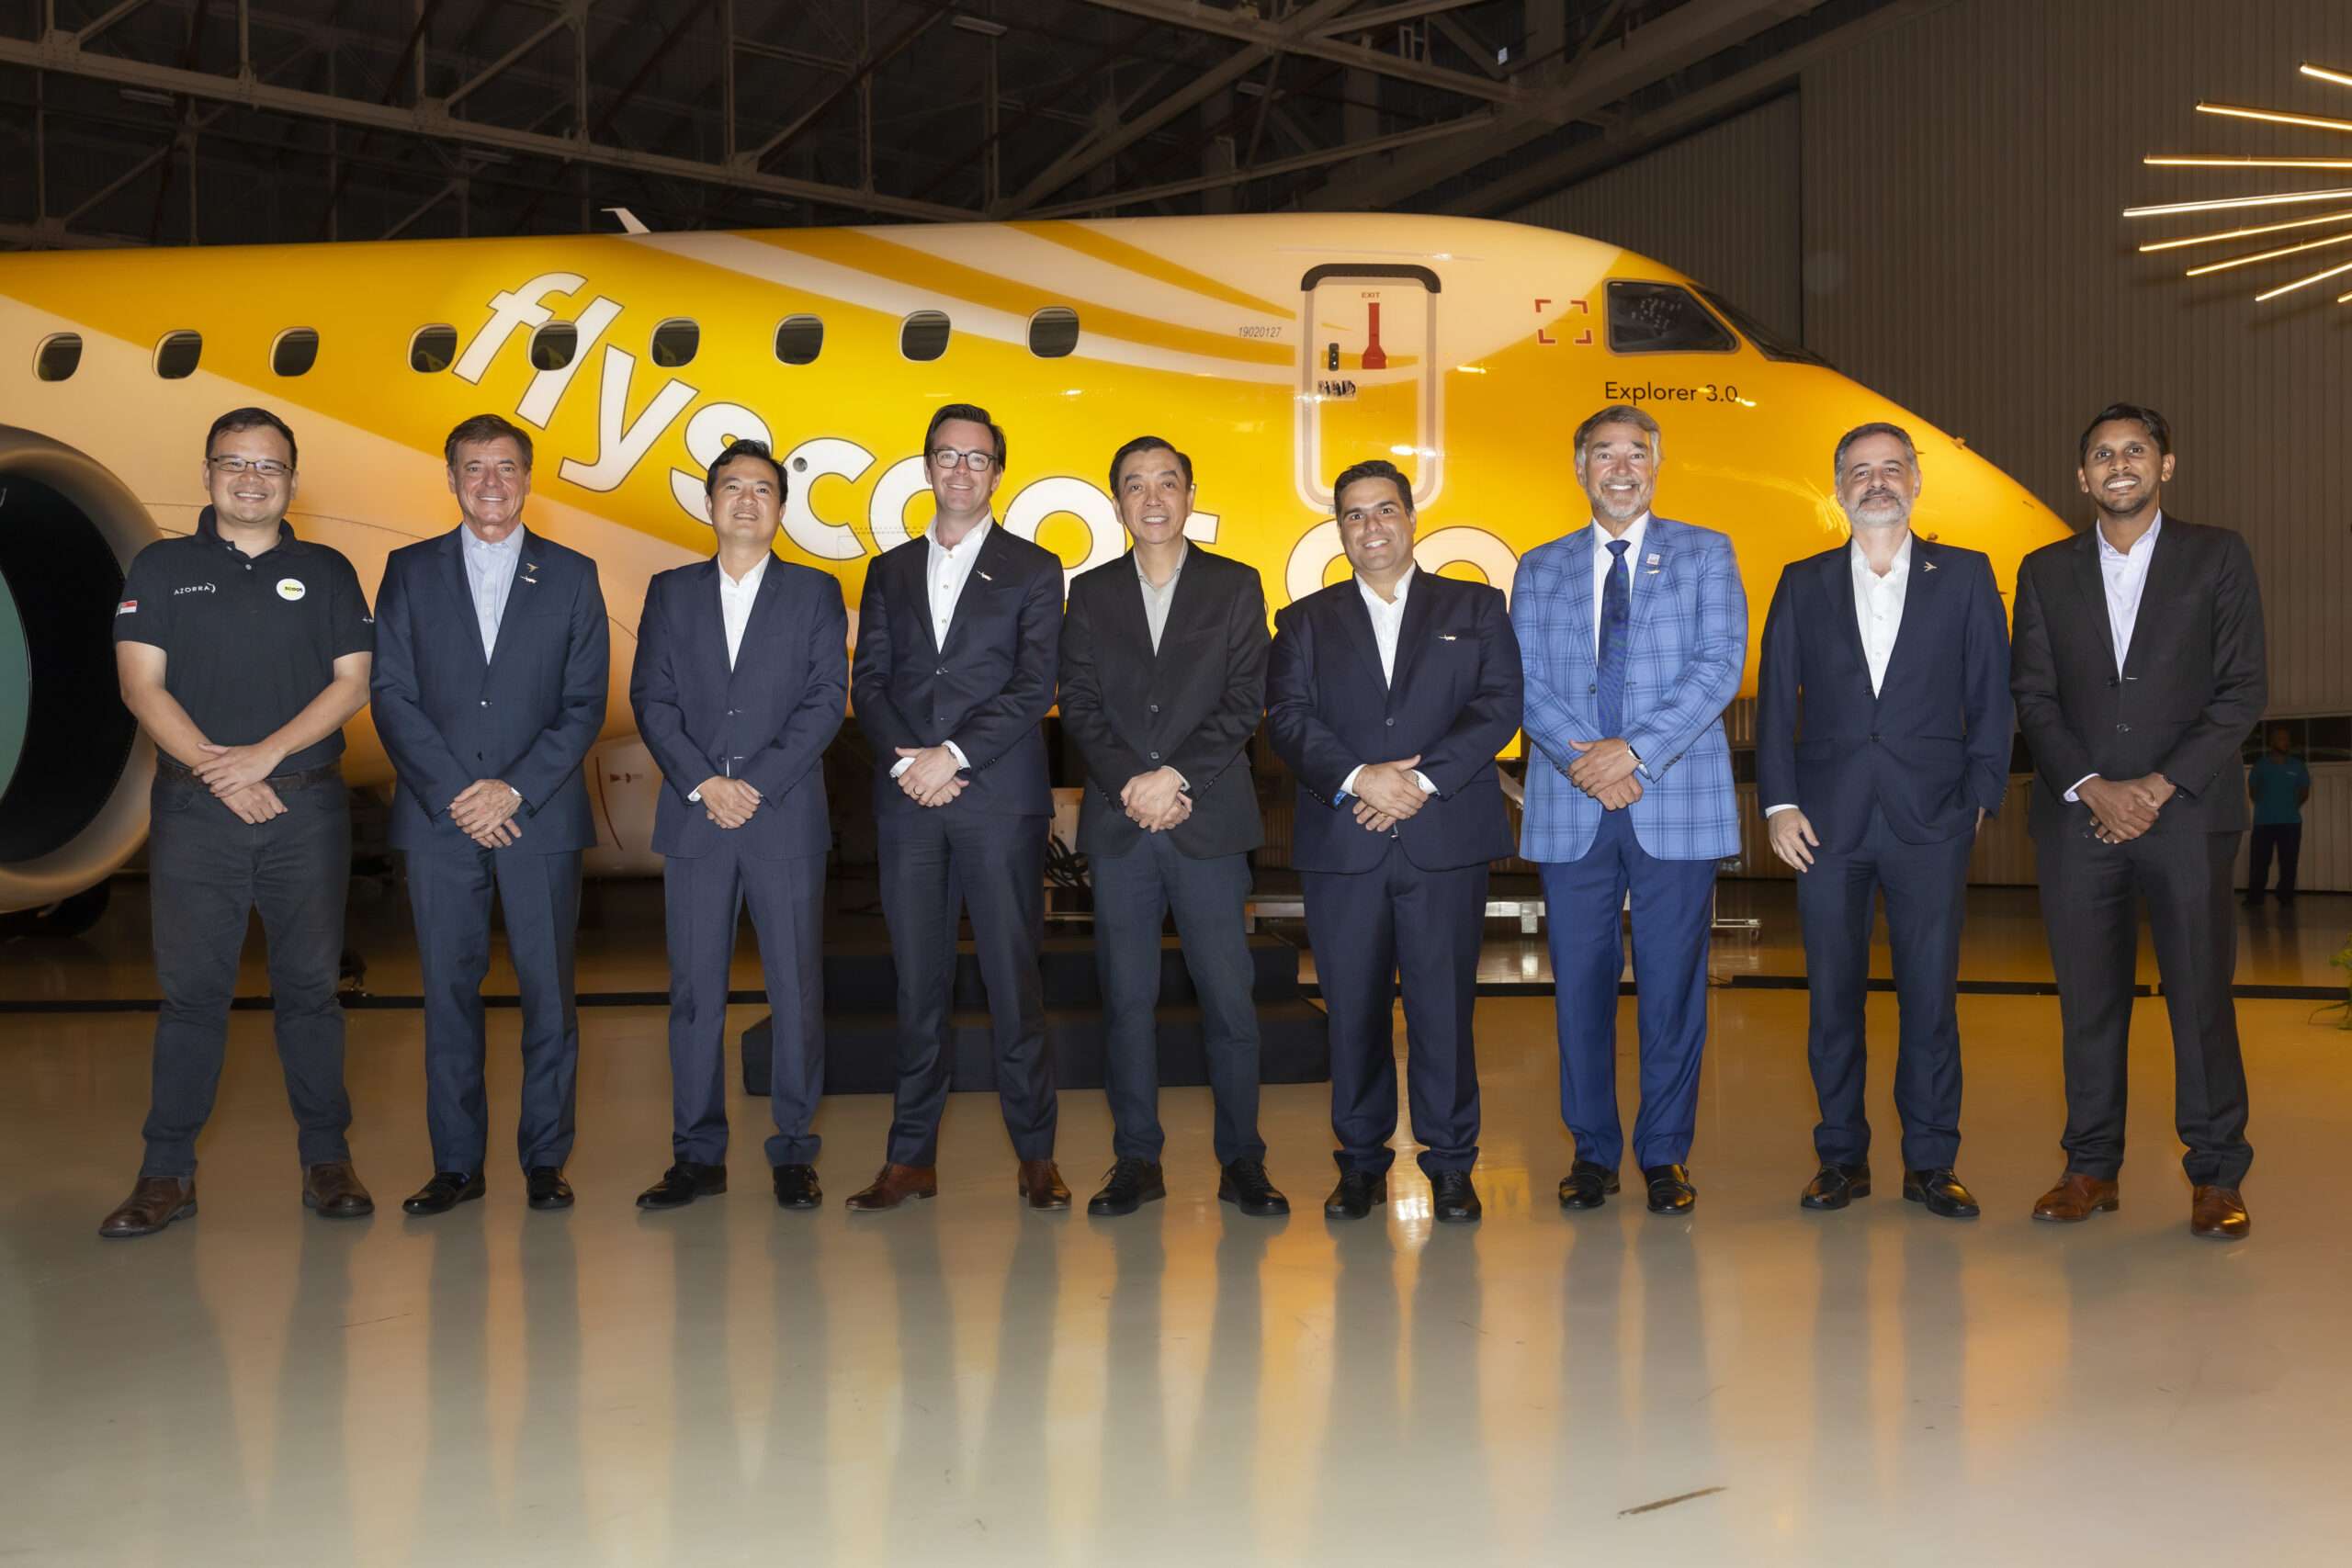 Celebration in Sao Paulo: Scoot Receives First Embraer E190-E2